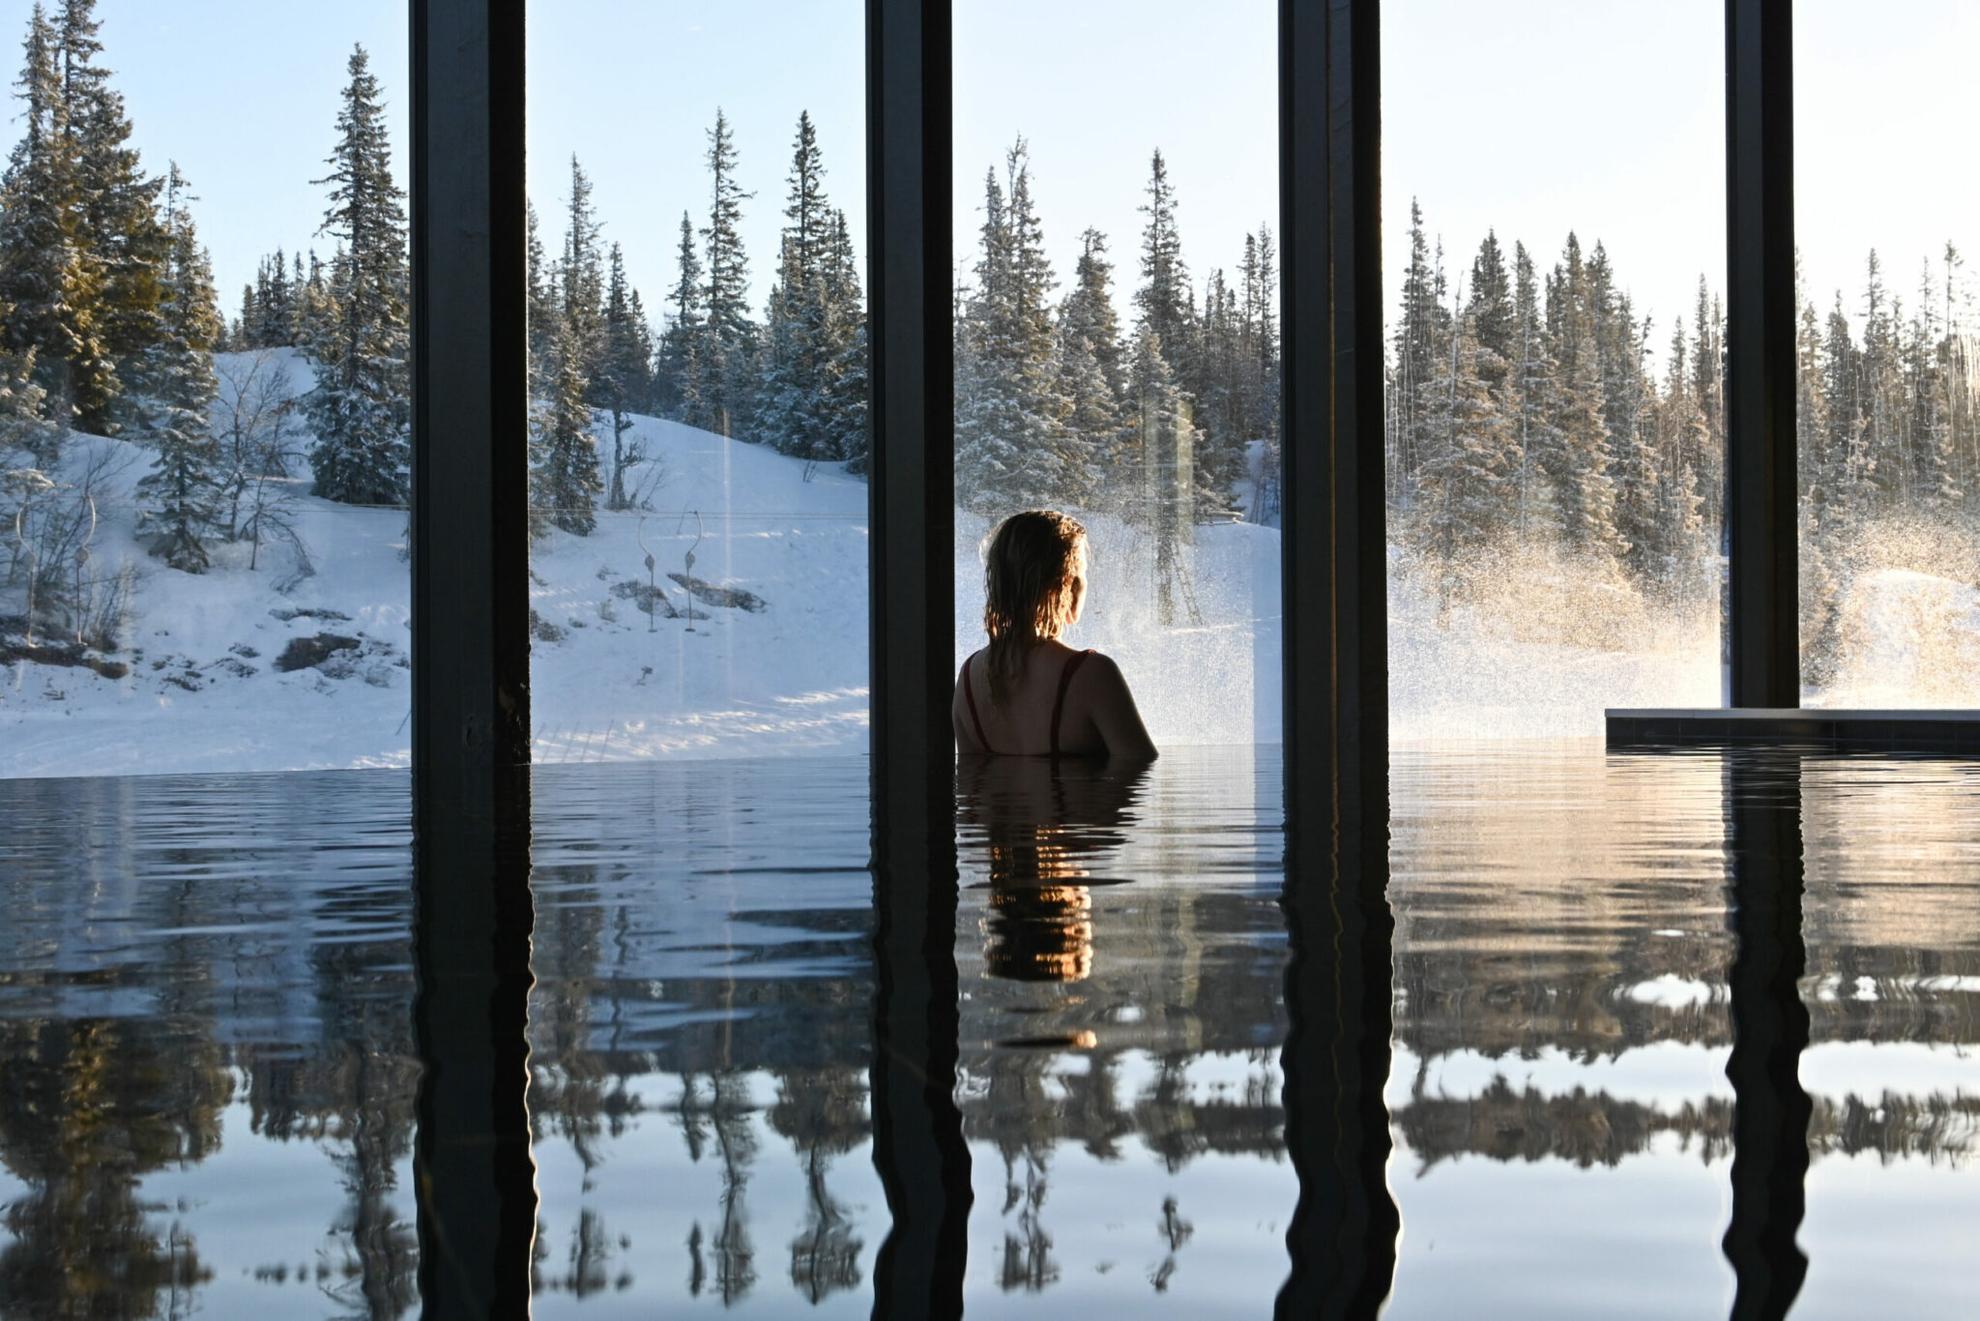 A person in an indoor infinity pool looking out through the big windows to the snow-covered forest.